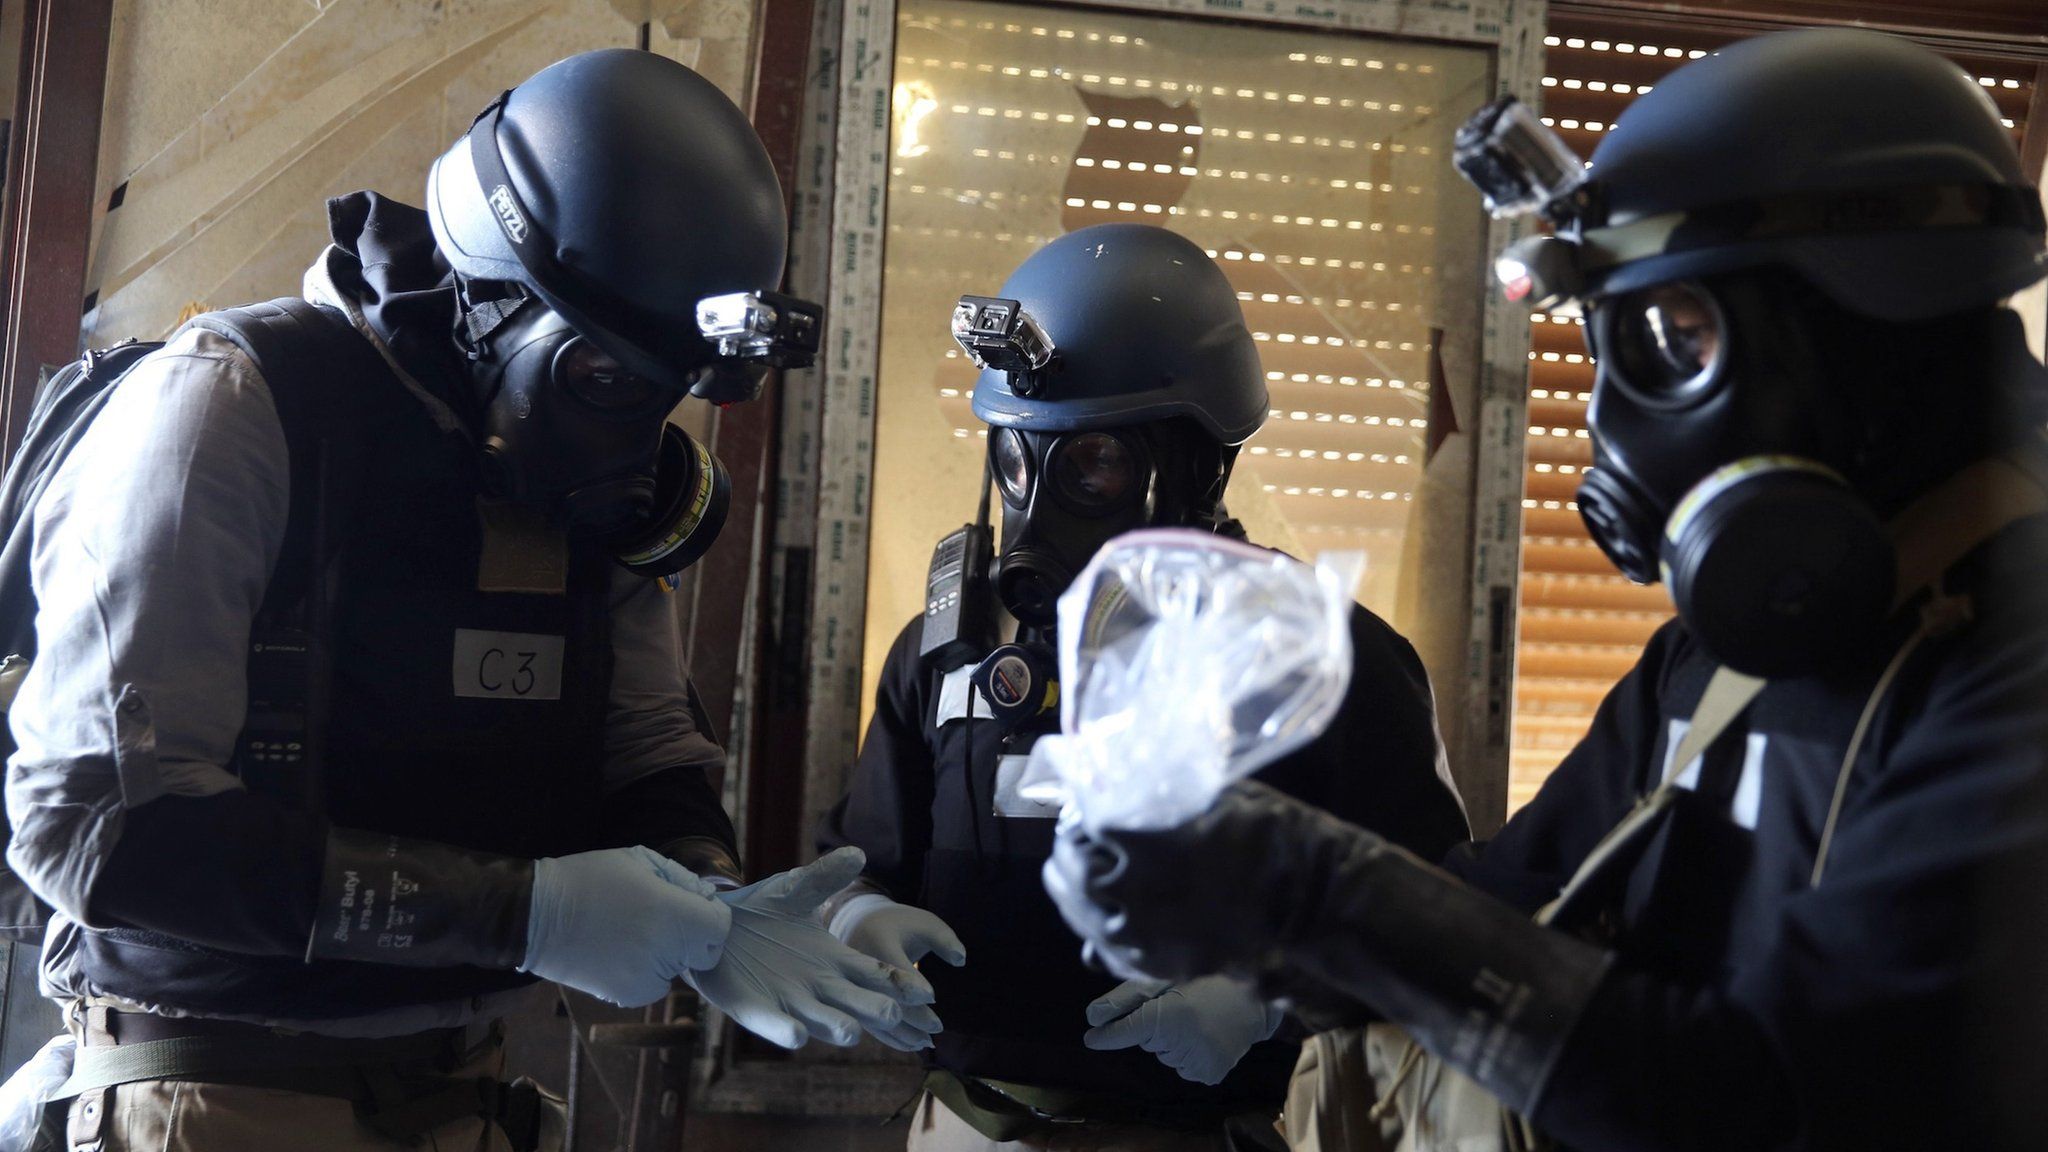 Chemical weapons experts collect samples from the site of an attack in Ain Tarma, Damascus, on 29 August 2013